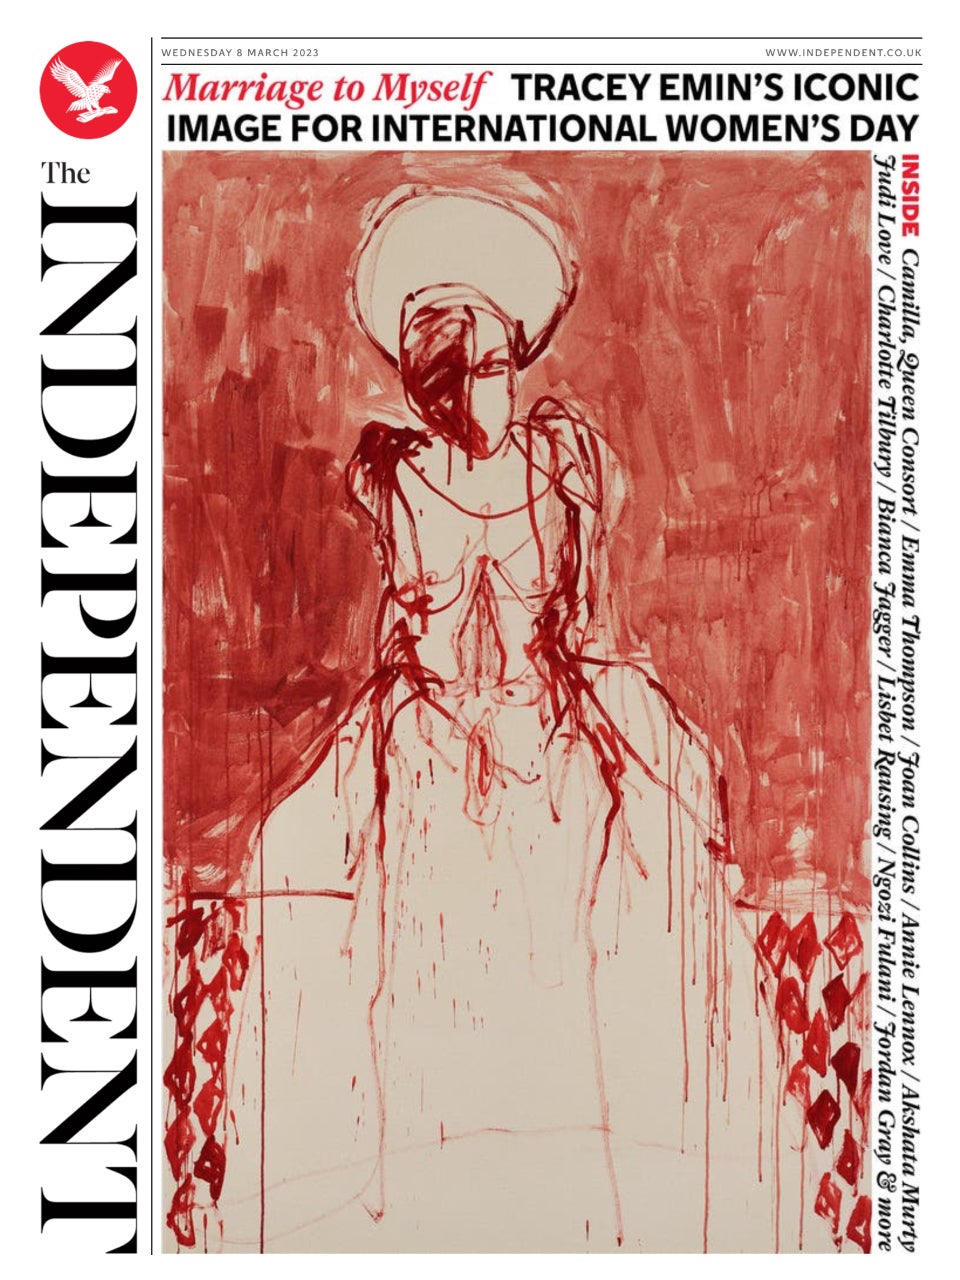 Tracey Emin has created an exlusive acrylic for The Independent